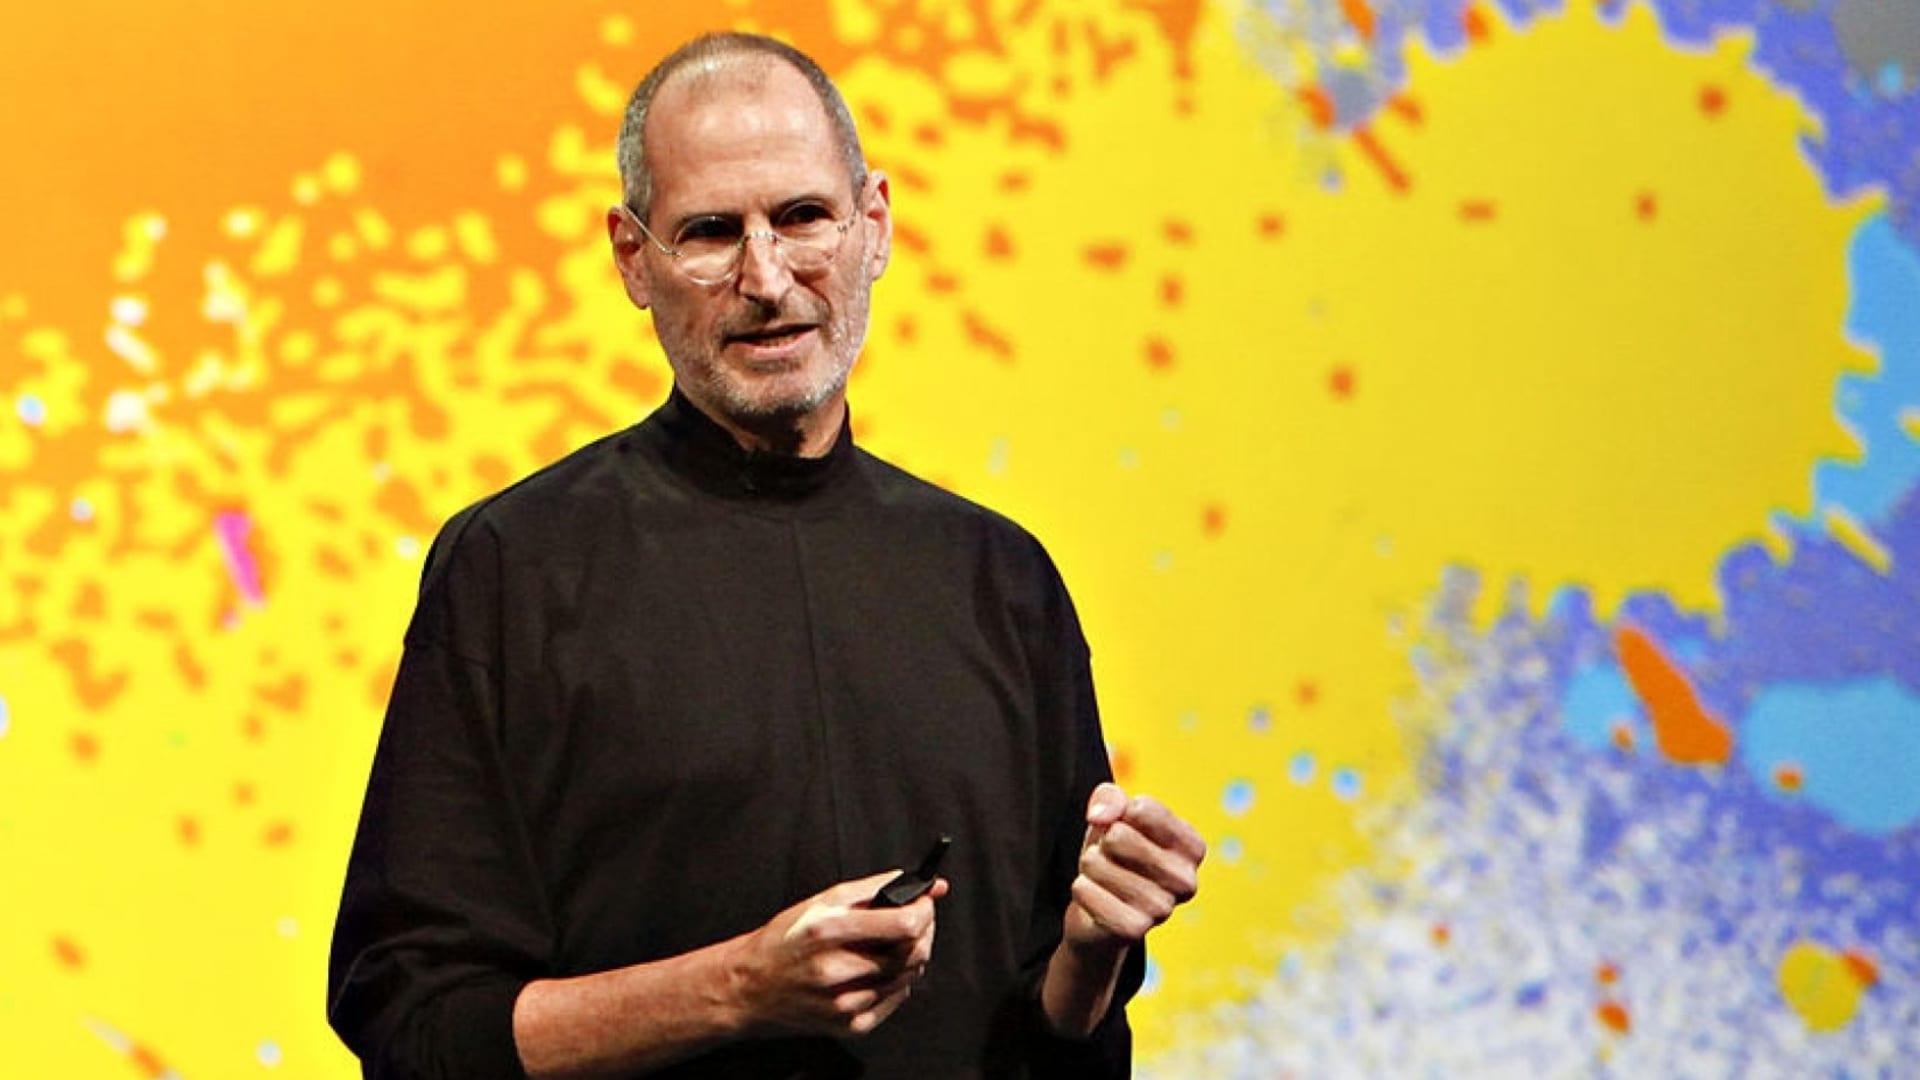 This Advice From Steve Jobs Is Only 5 Words, but It Teaches a Master Class in How to Build a Great Business